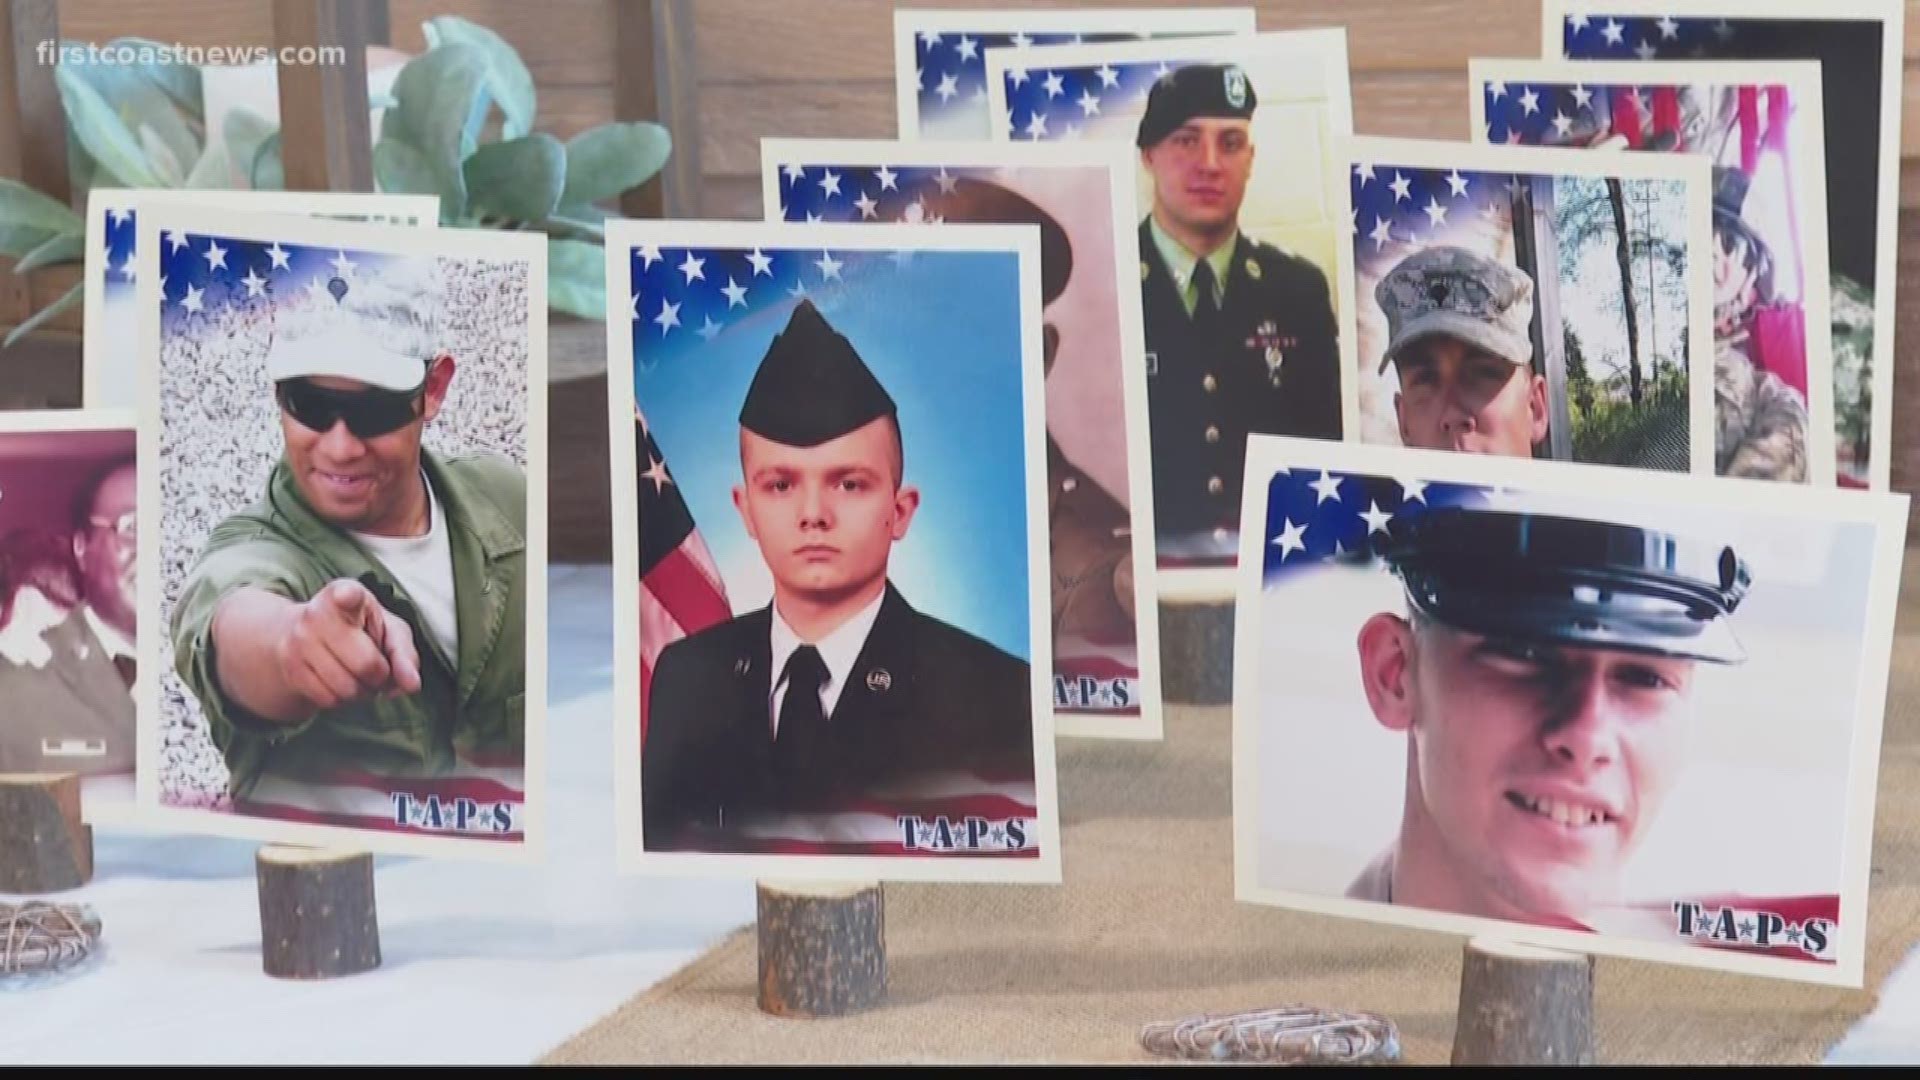 Across the country, thousands of grieving military families share a common connection -- the service of their loved one.